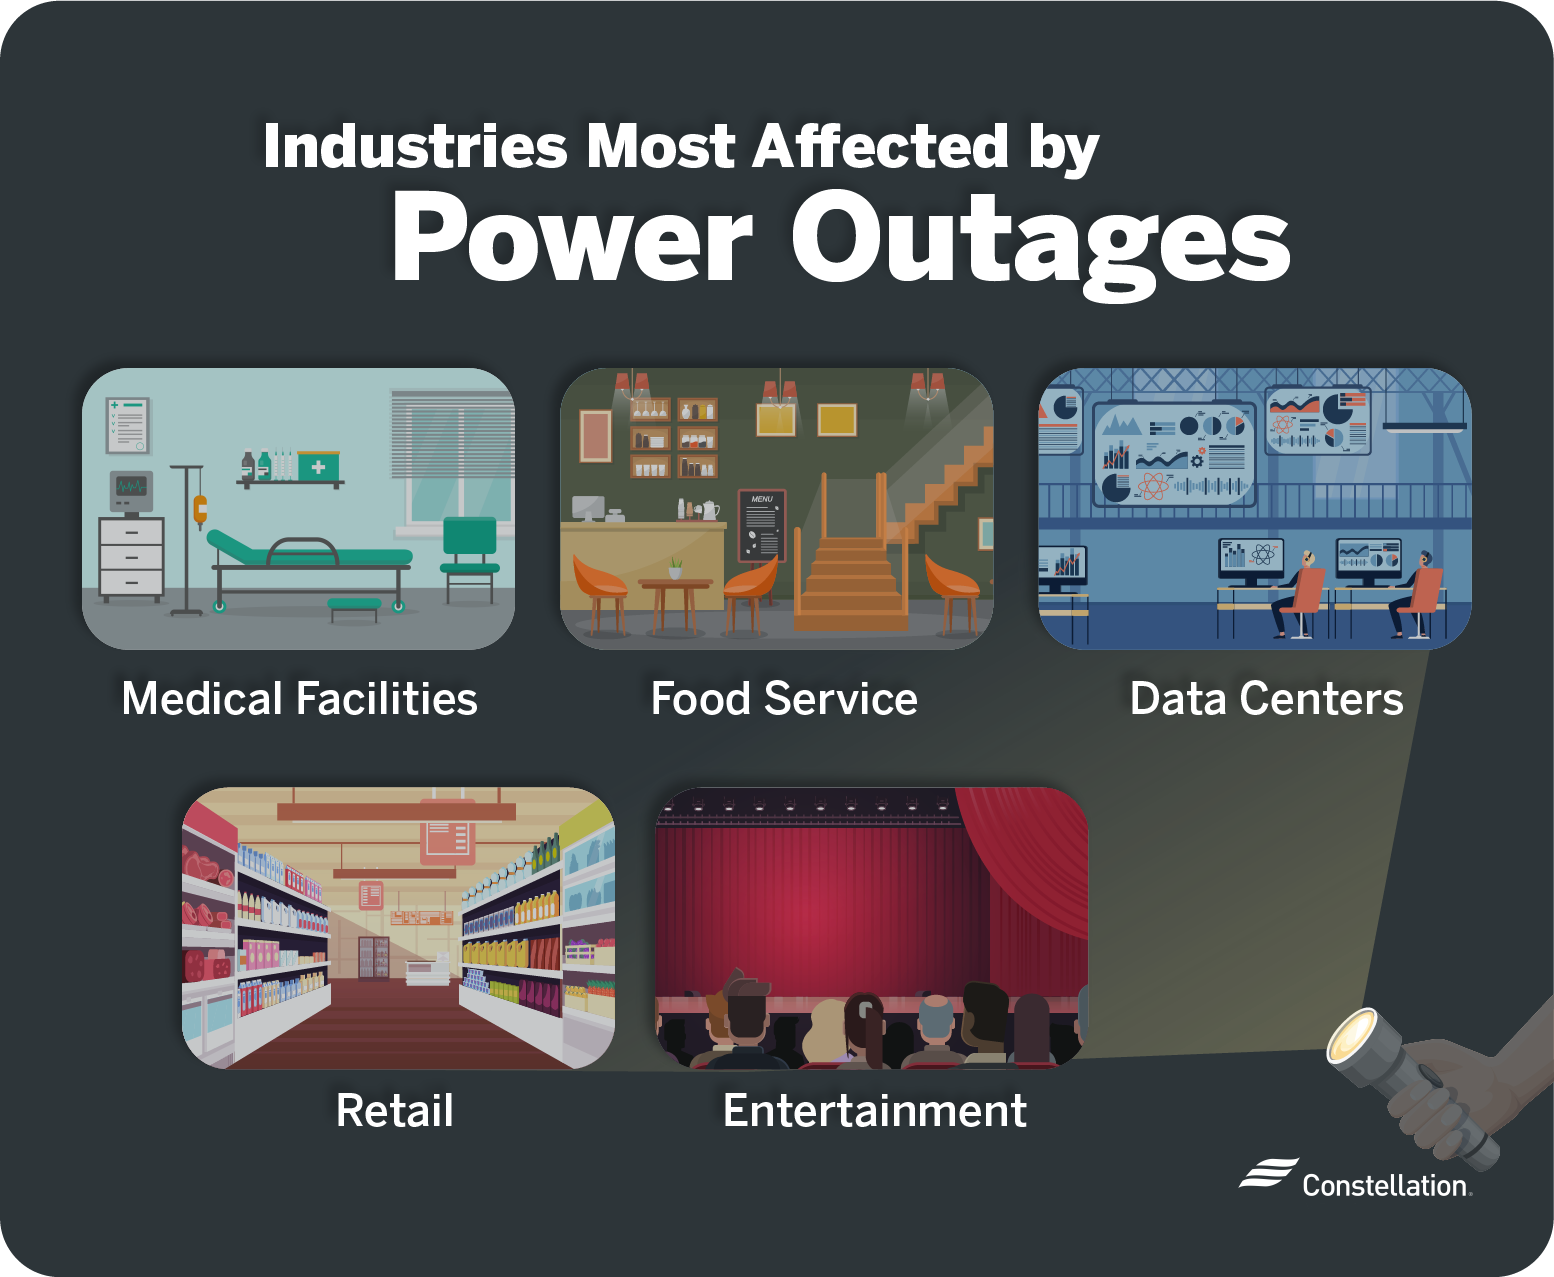 Industries more affected by power outages